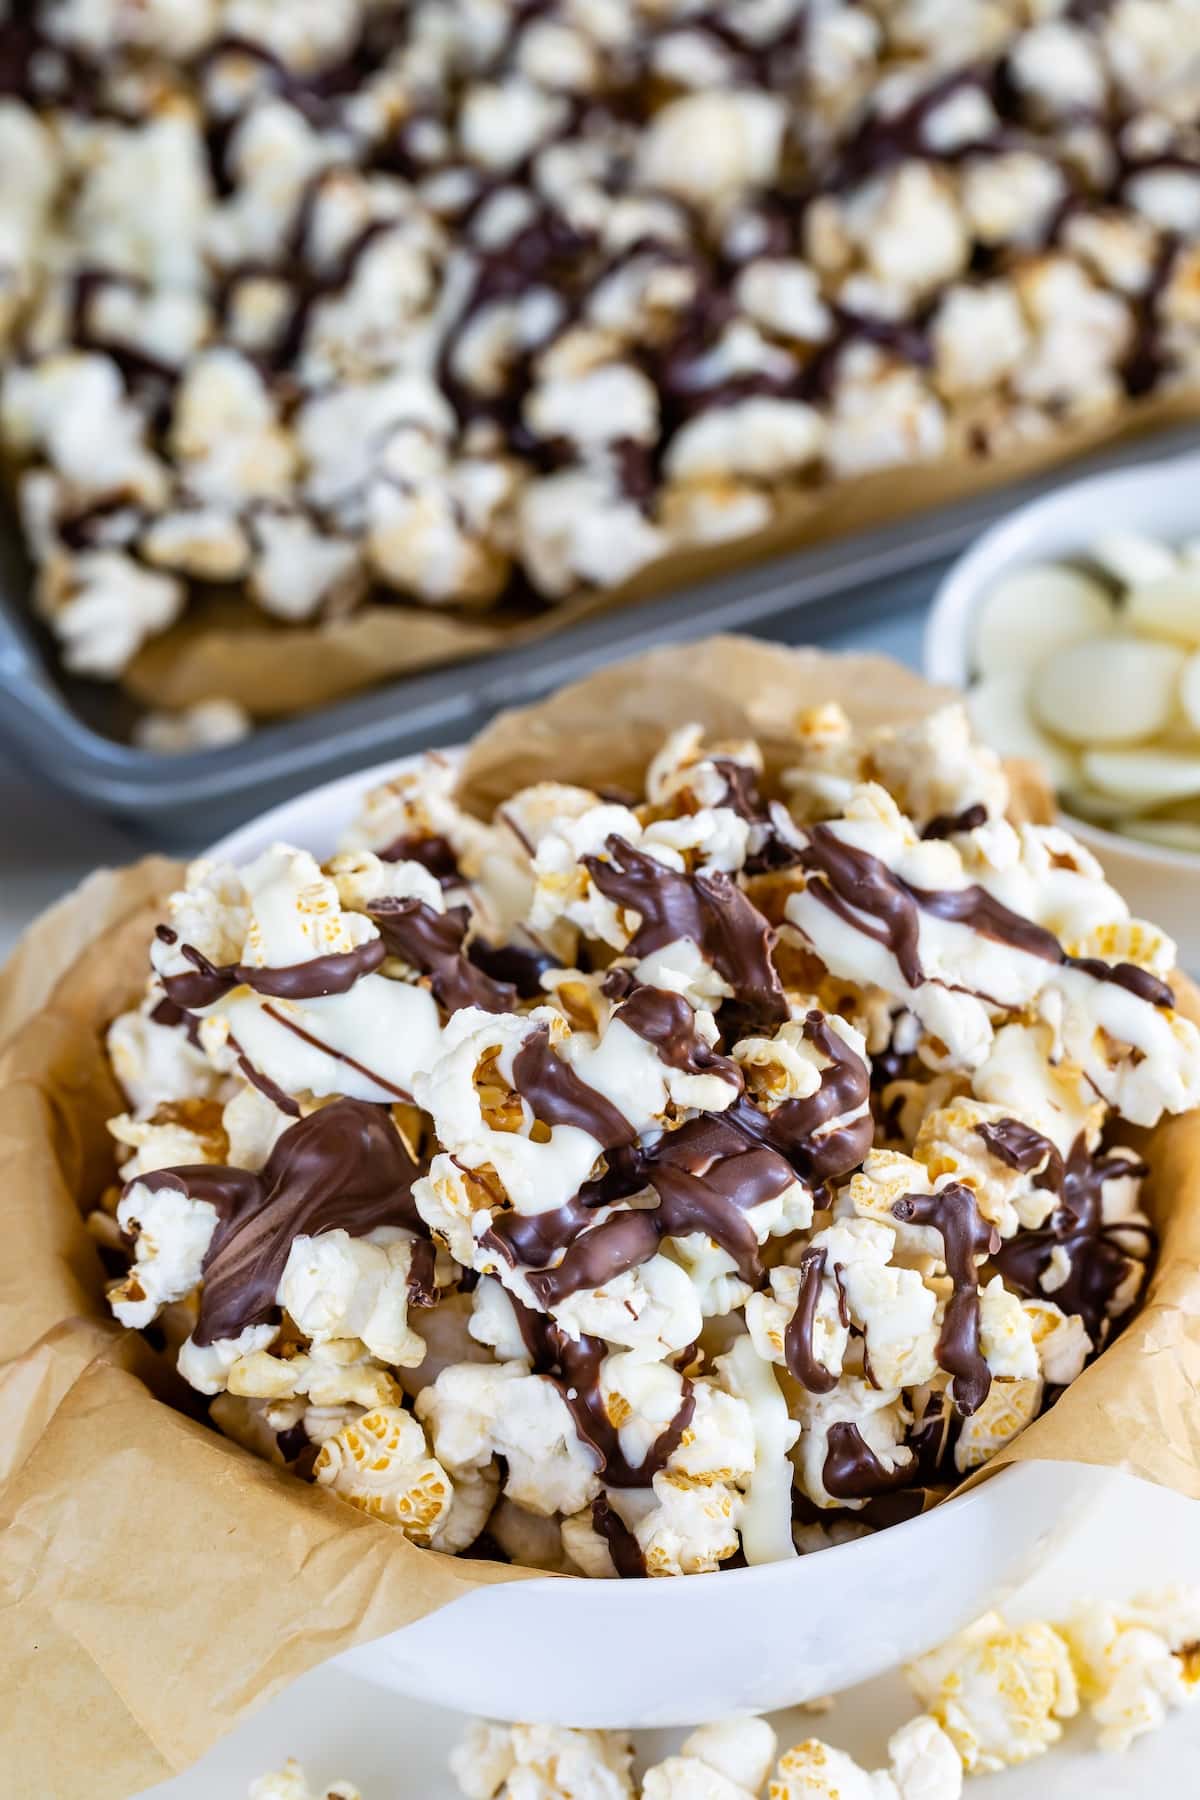 popcorn in a white bowl covered in chocolate drizzle.